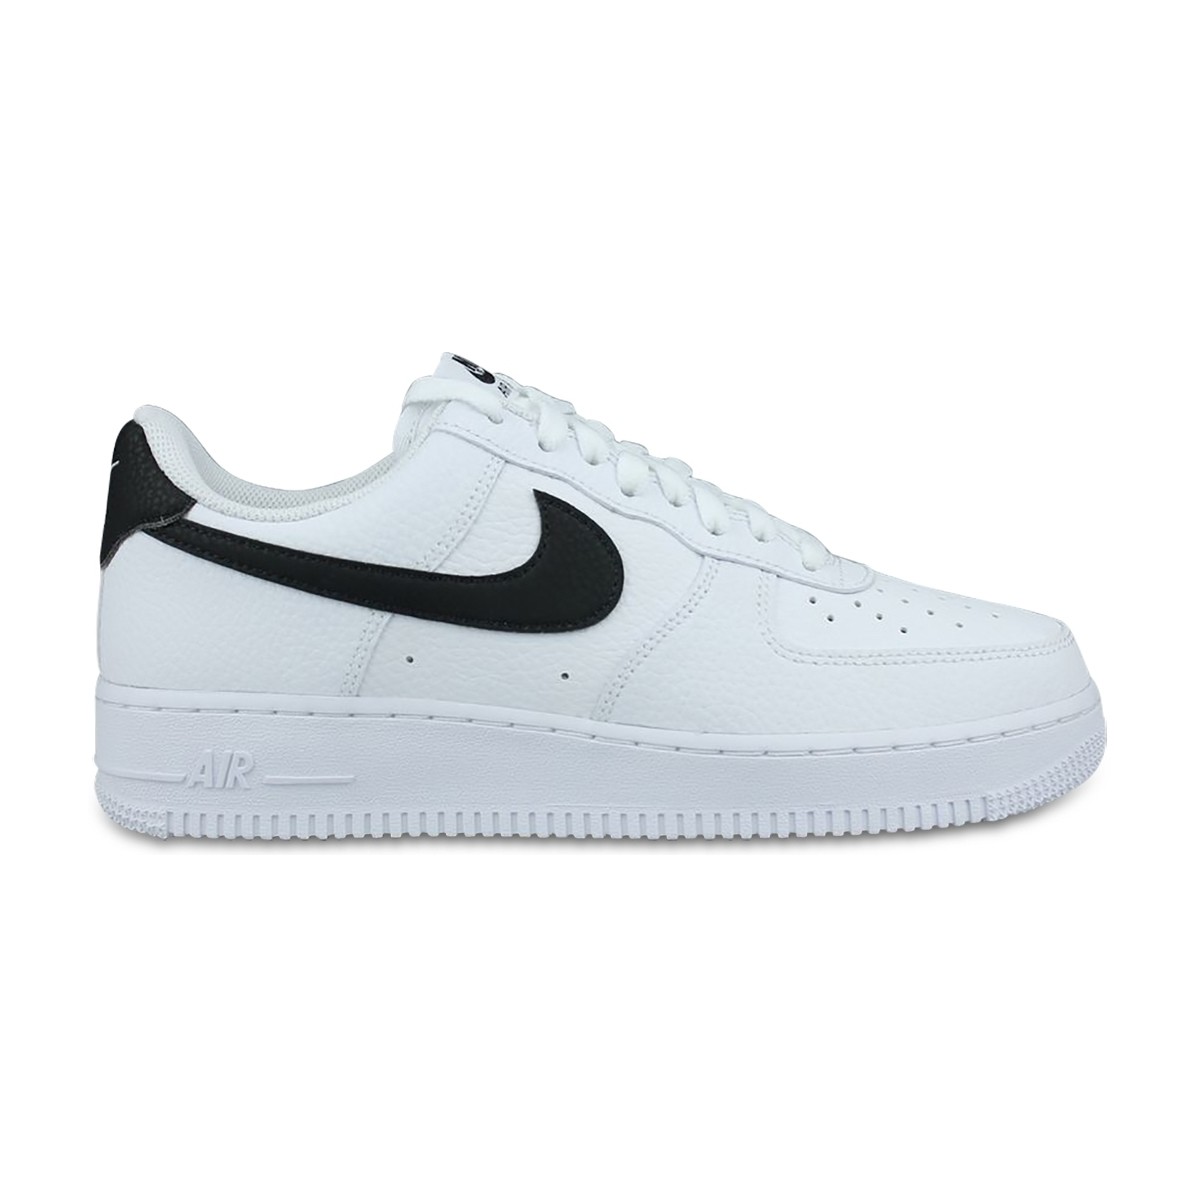 Basket Nike Air Force 1 Low Ct2302 100 21328520 1200 A